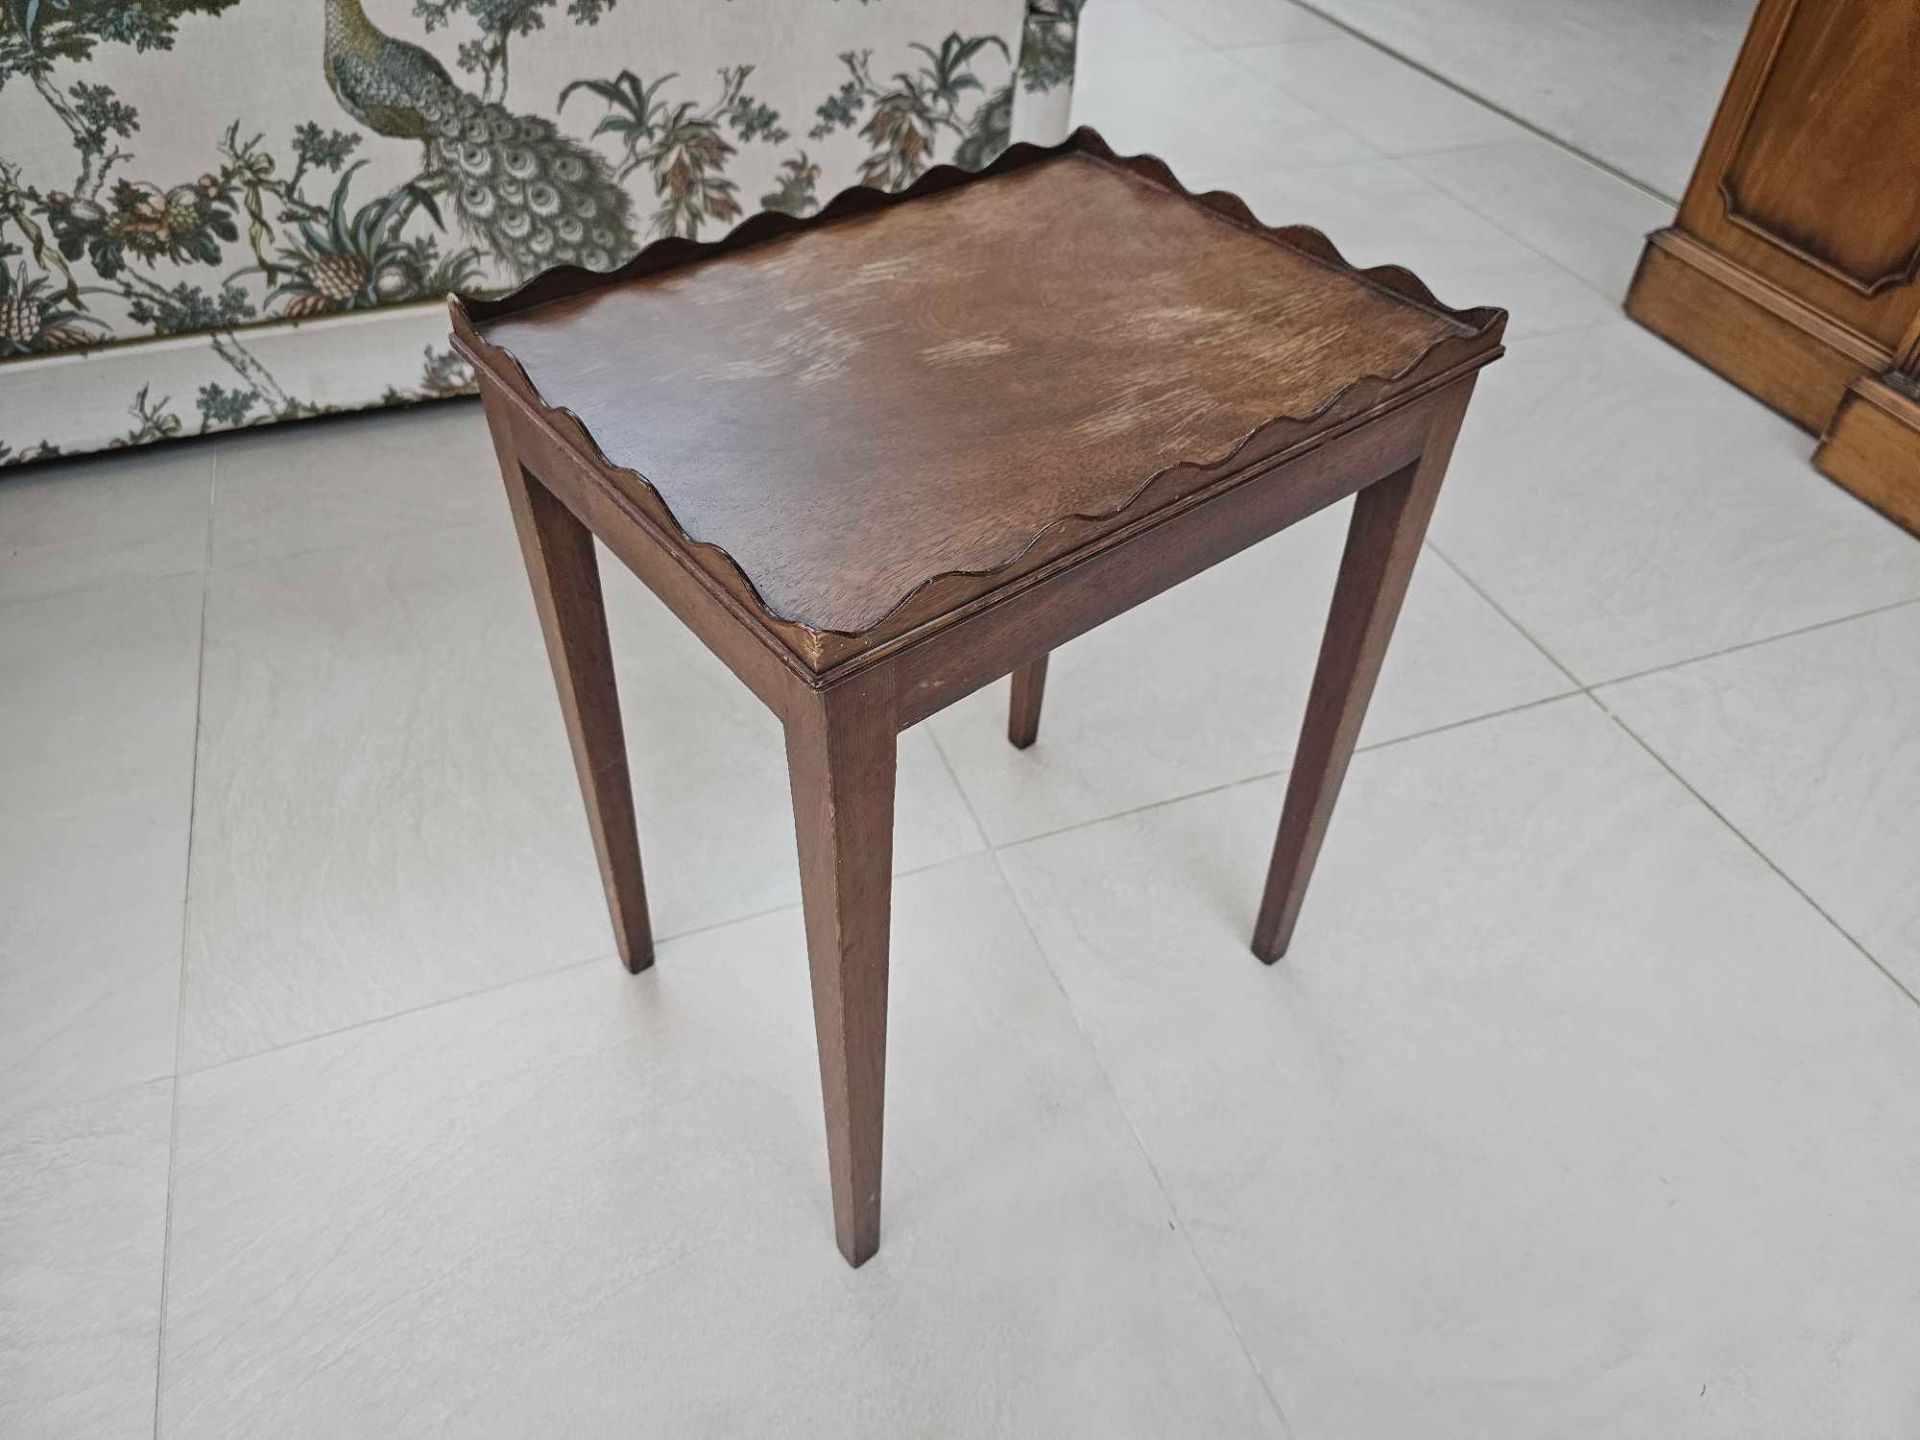 A Scalloped Edge Side Table Raised On Square Tapering Legs 42 X 32 X 52cm - Image 2 of 5